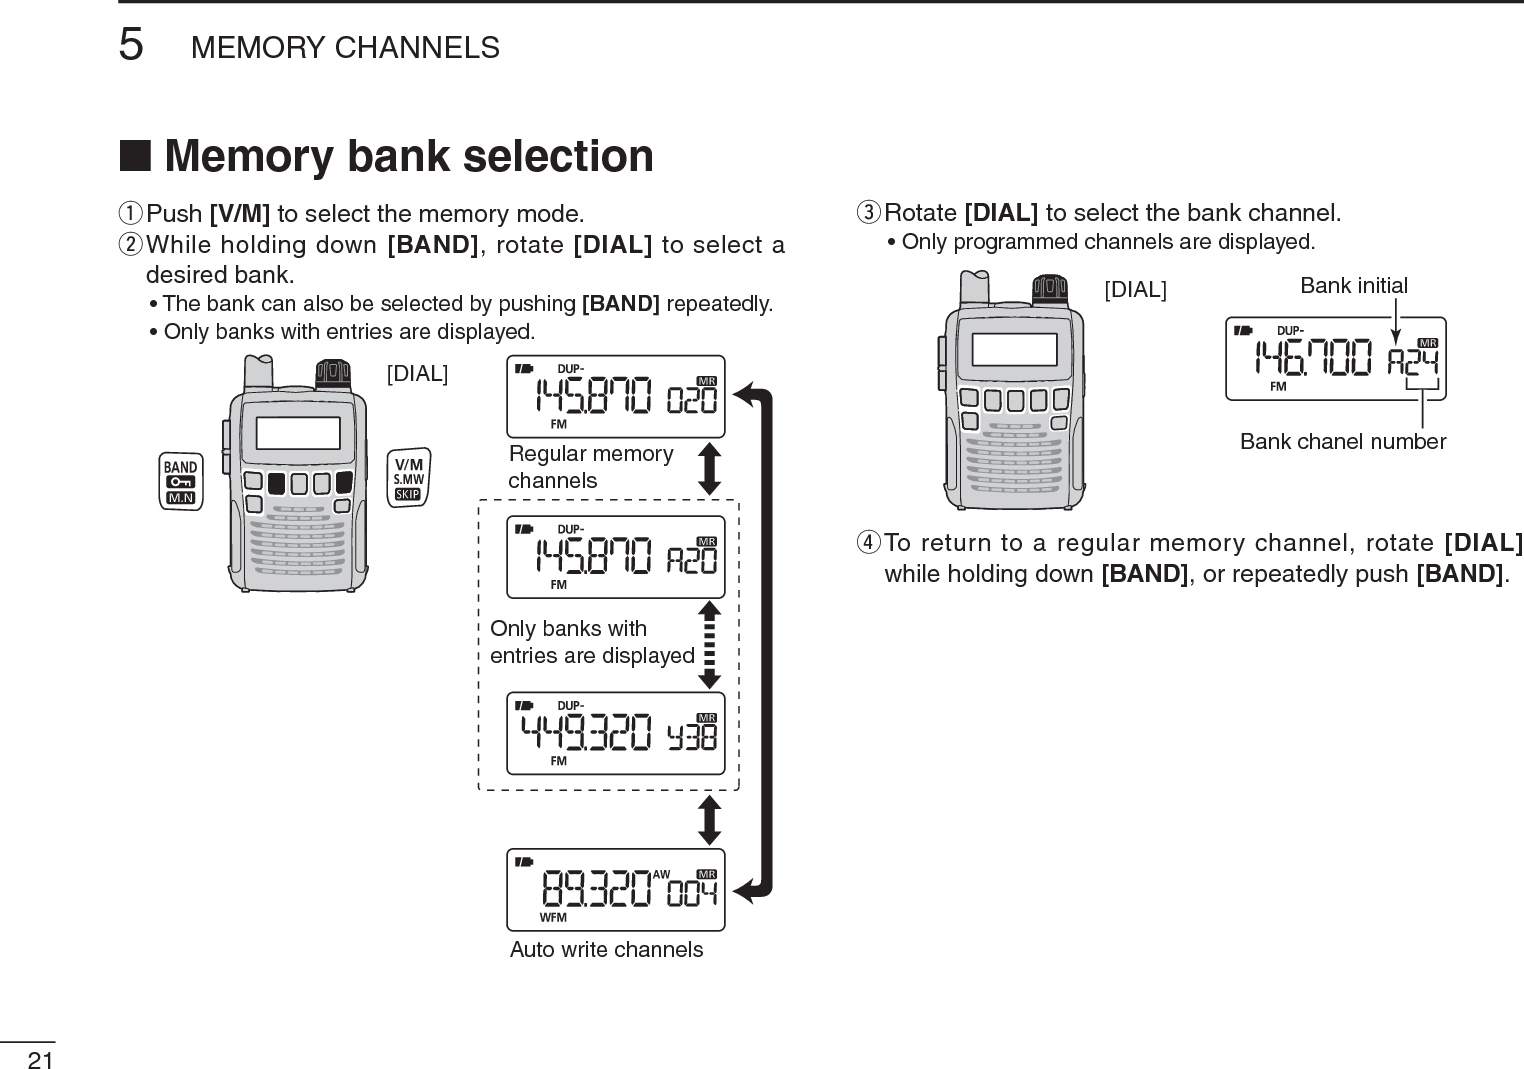 215MEMORY CHANNELSN Memory bank selectionqPush [V/M] to select the memory mode.w  While holding down [BAND], rotate [DIAL] to select a desired bank.• The bank can also be selected by pushing [BAND] repeatedly.• Only banks with entries are displayed.[DIAL]Auto write channelsRegular memorychannelsOnly banks with entries are displayede  Rotate [DIAL] to select the bank channel.• Only programmed channels are displayed.[DIAL] Bank initialBank chanel numberr  To return to a regular memory channel, rotate [DIAL]while holding down [BAND], or repeatedly push [BAND].